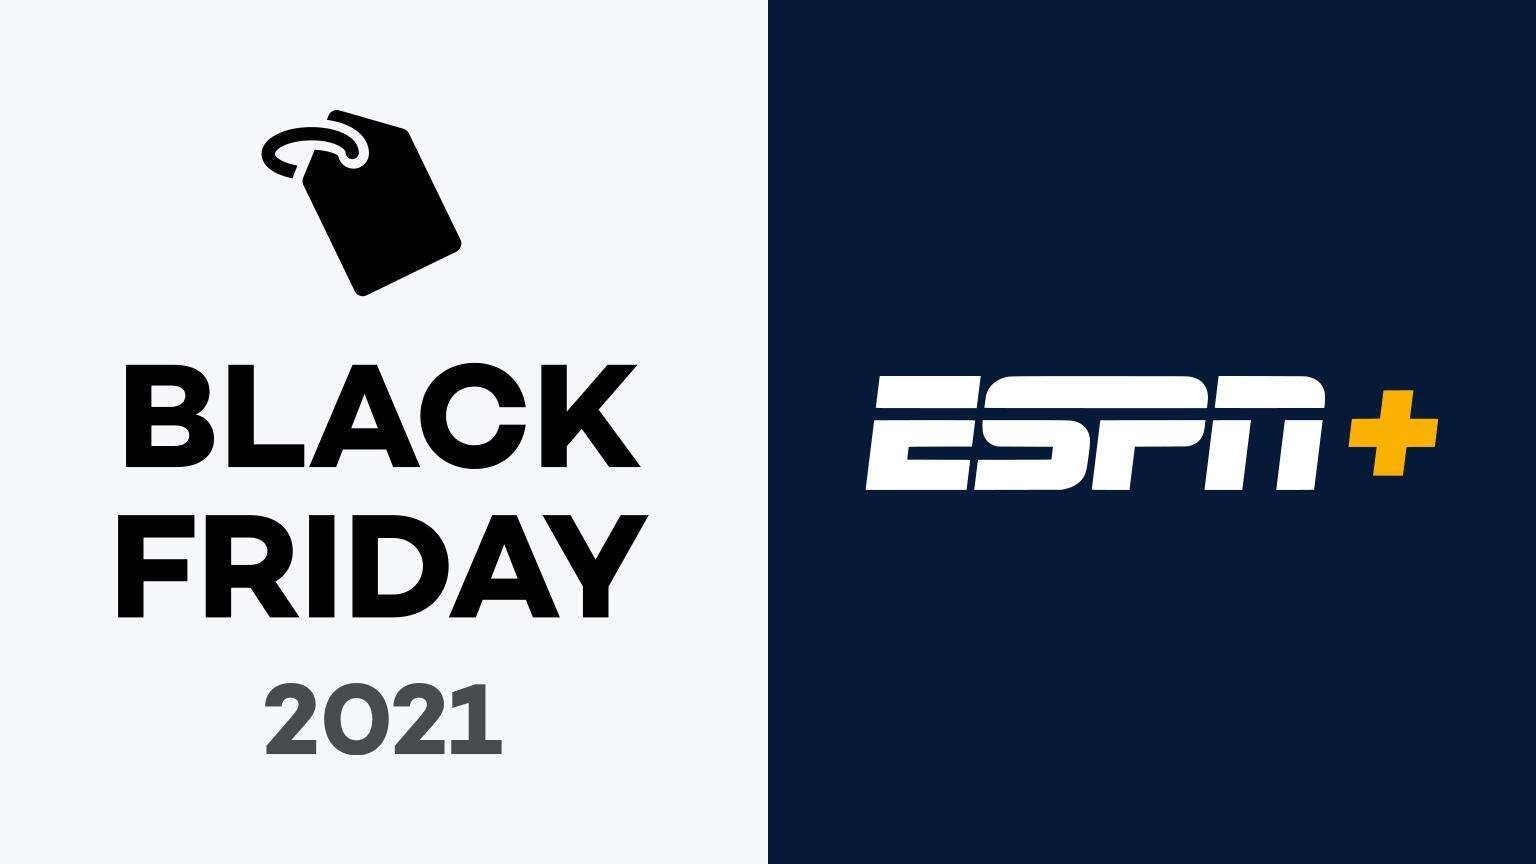 ESPN+ Black Friday 2021 Deals What Are the Best Ways to Save on ESPN